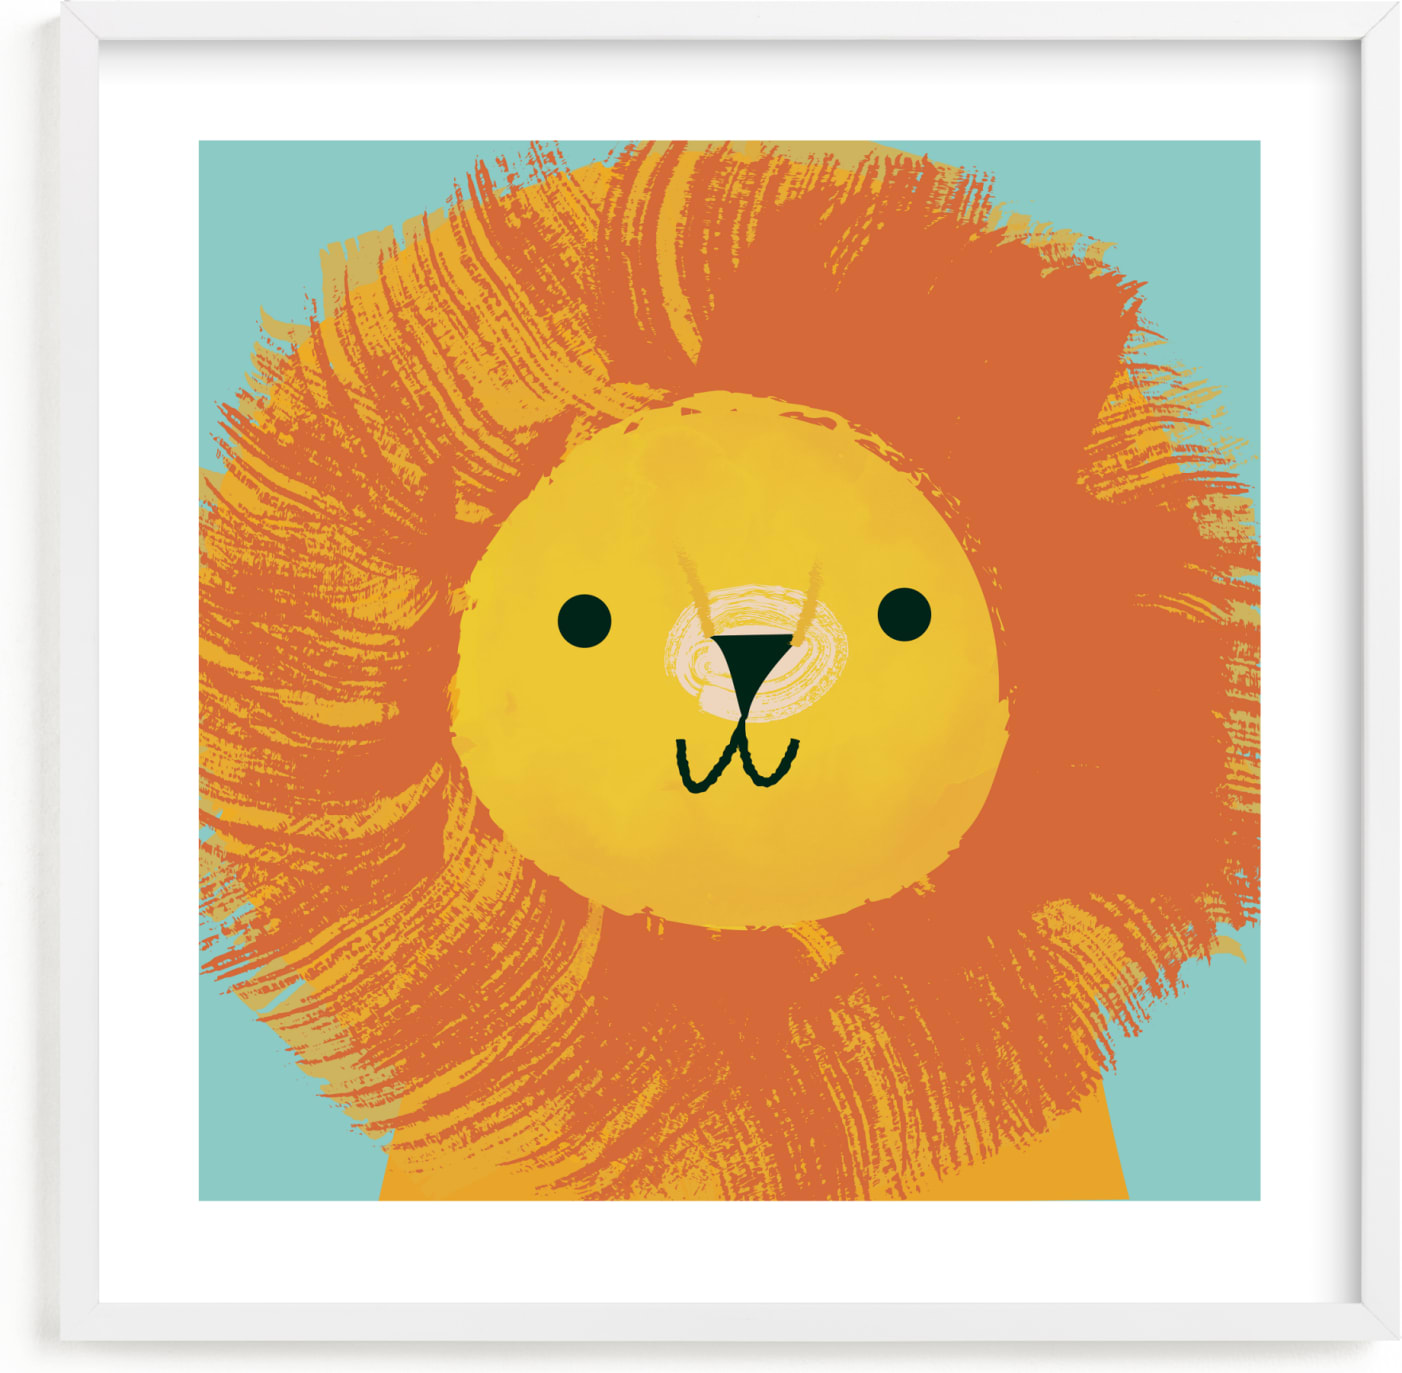 This is a yellow nursery wall art by Lori Wemple called King Of The Jungle.